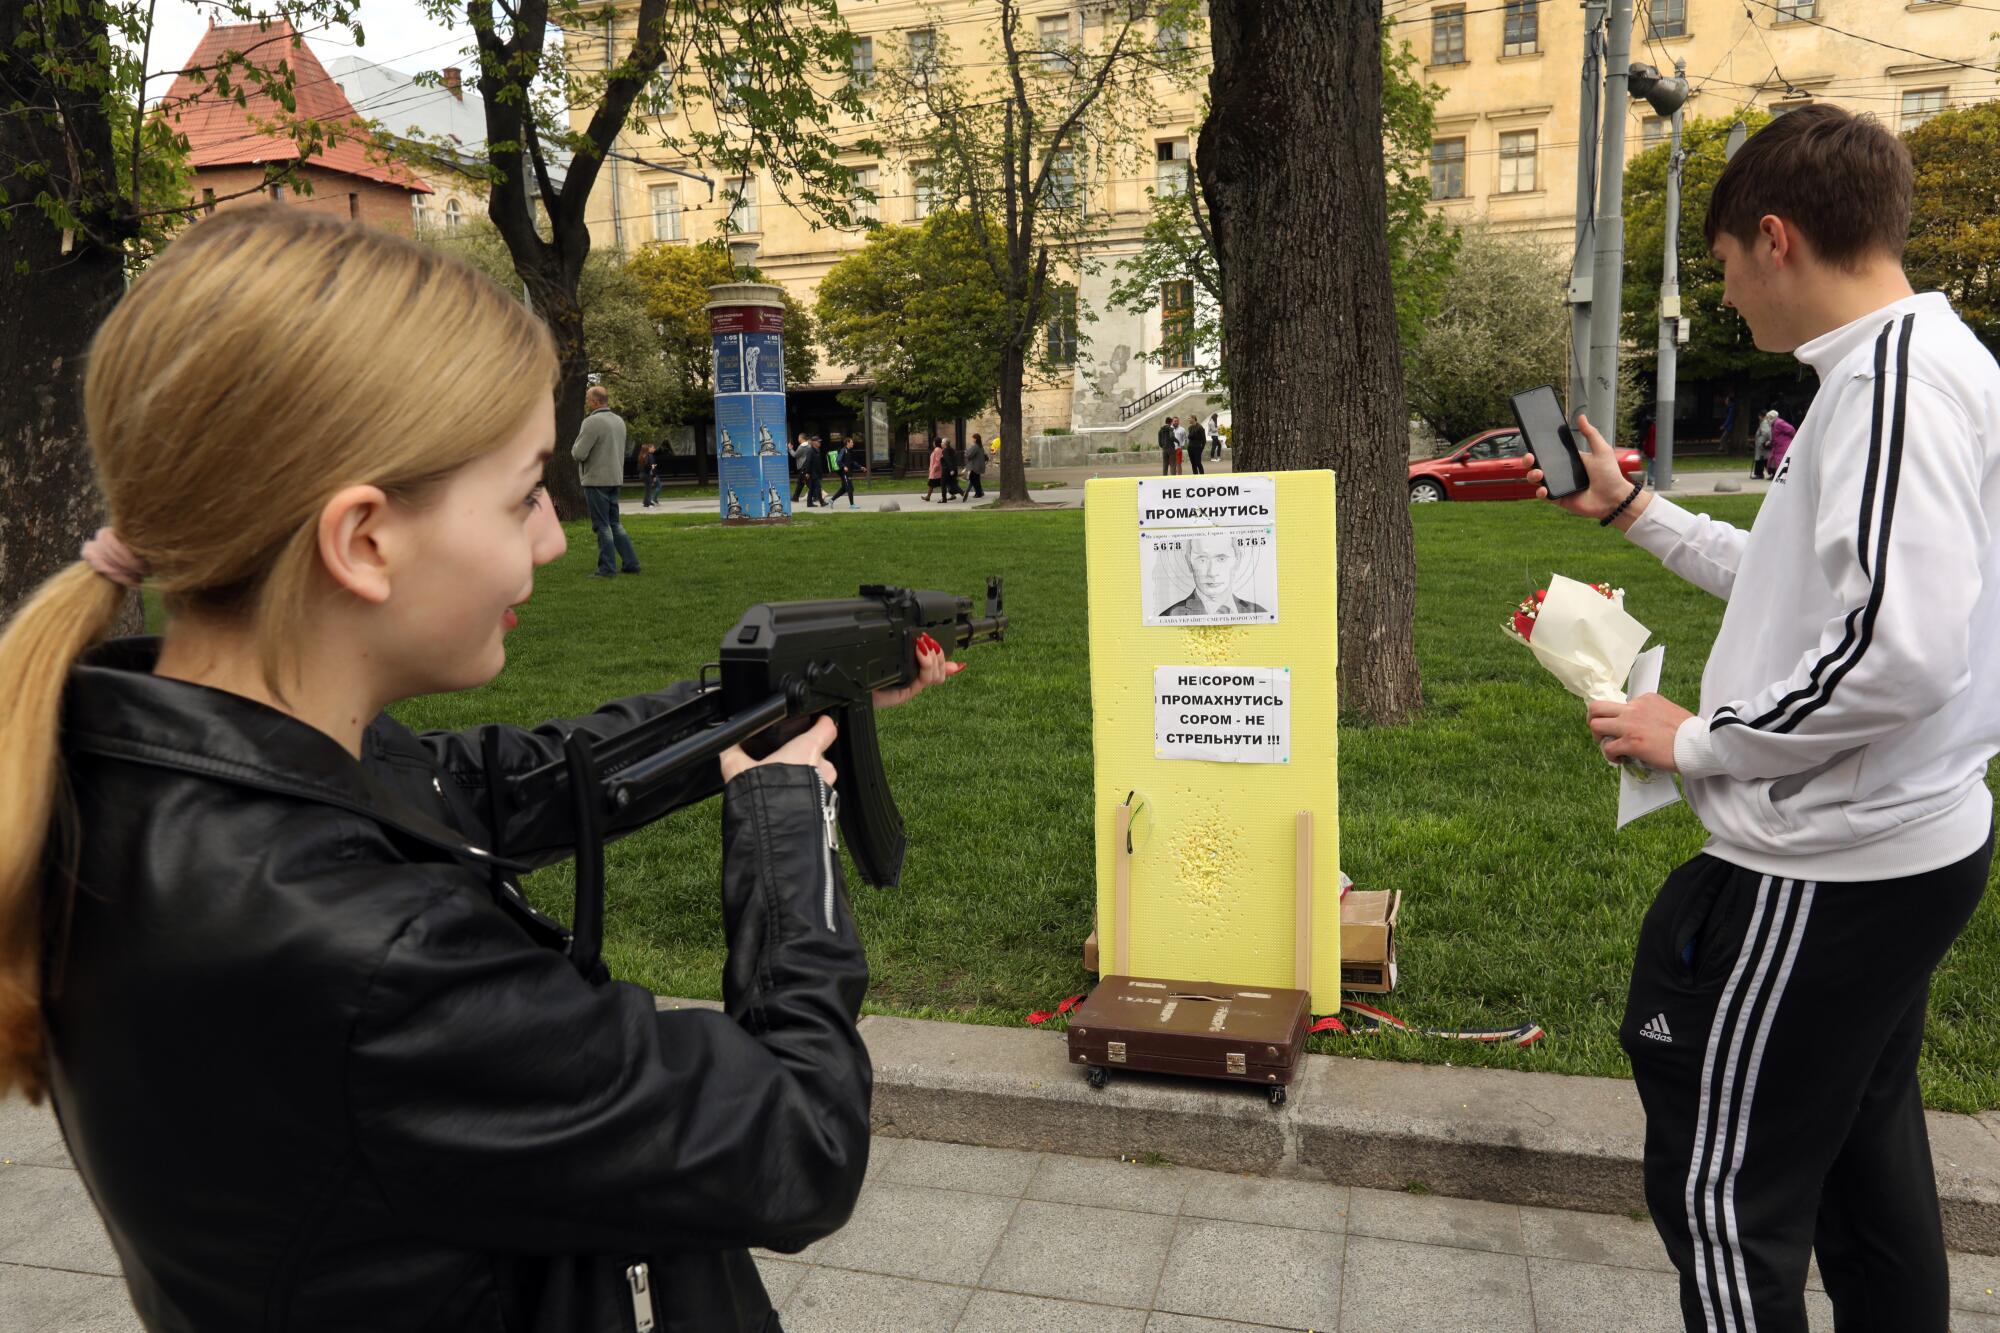 A BB gun is aimed at a picture of Putin as a game in downtown Lviv.